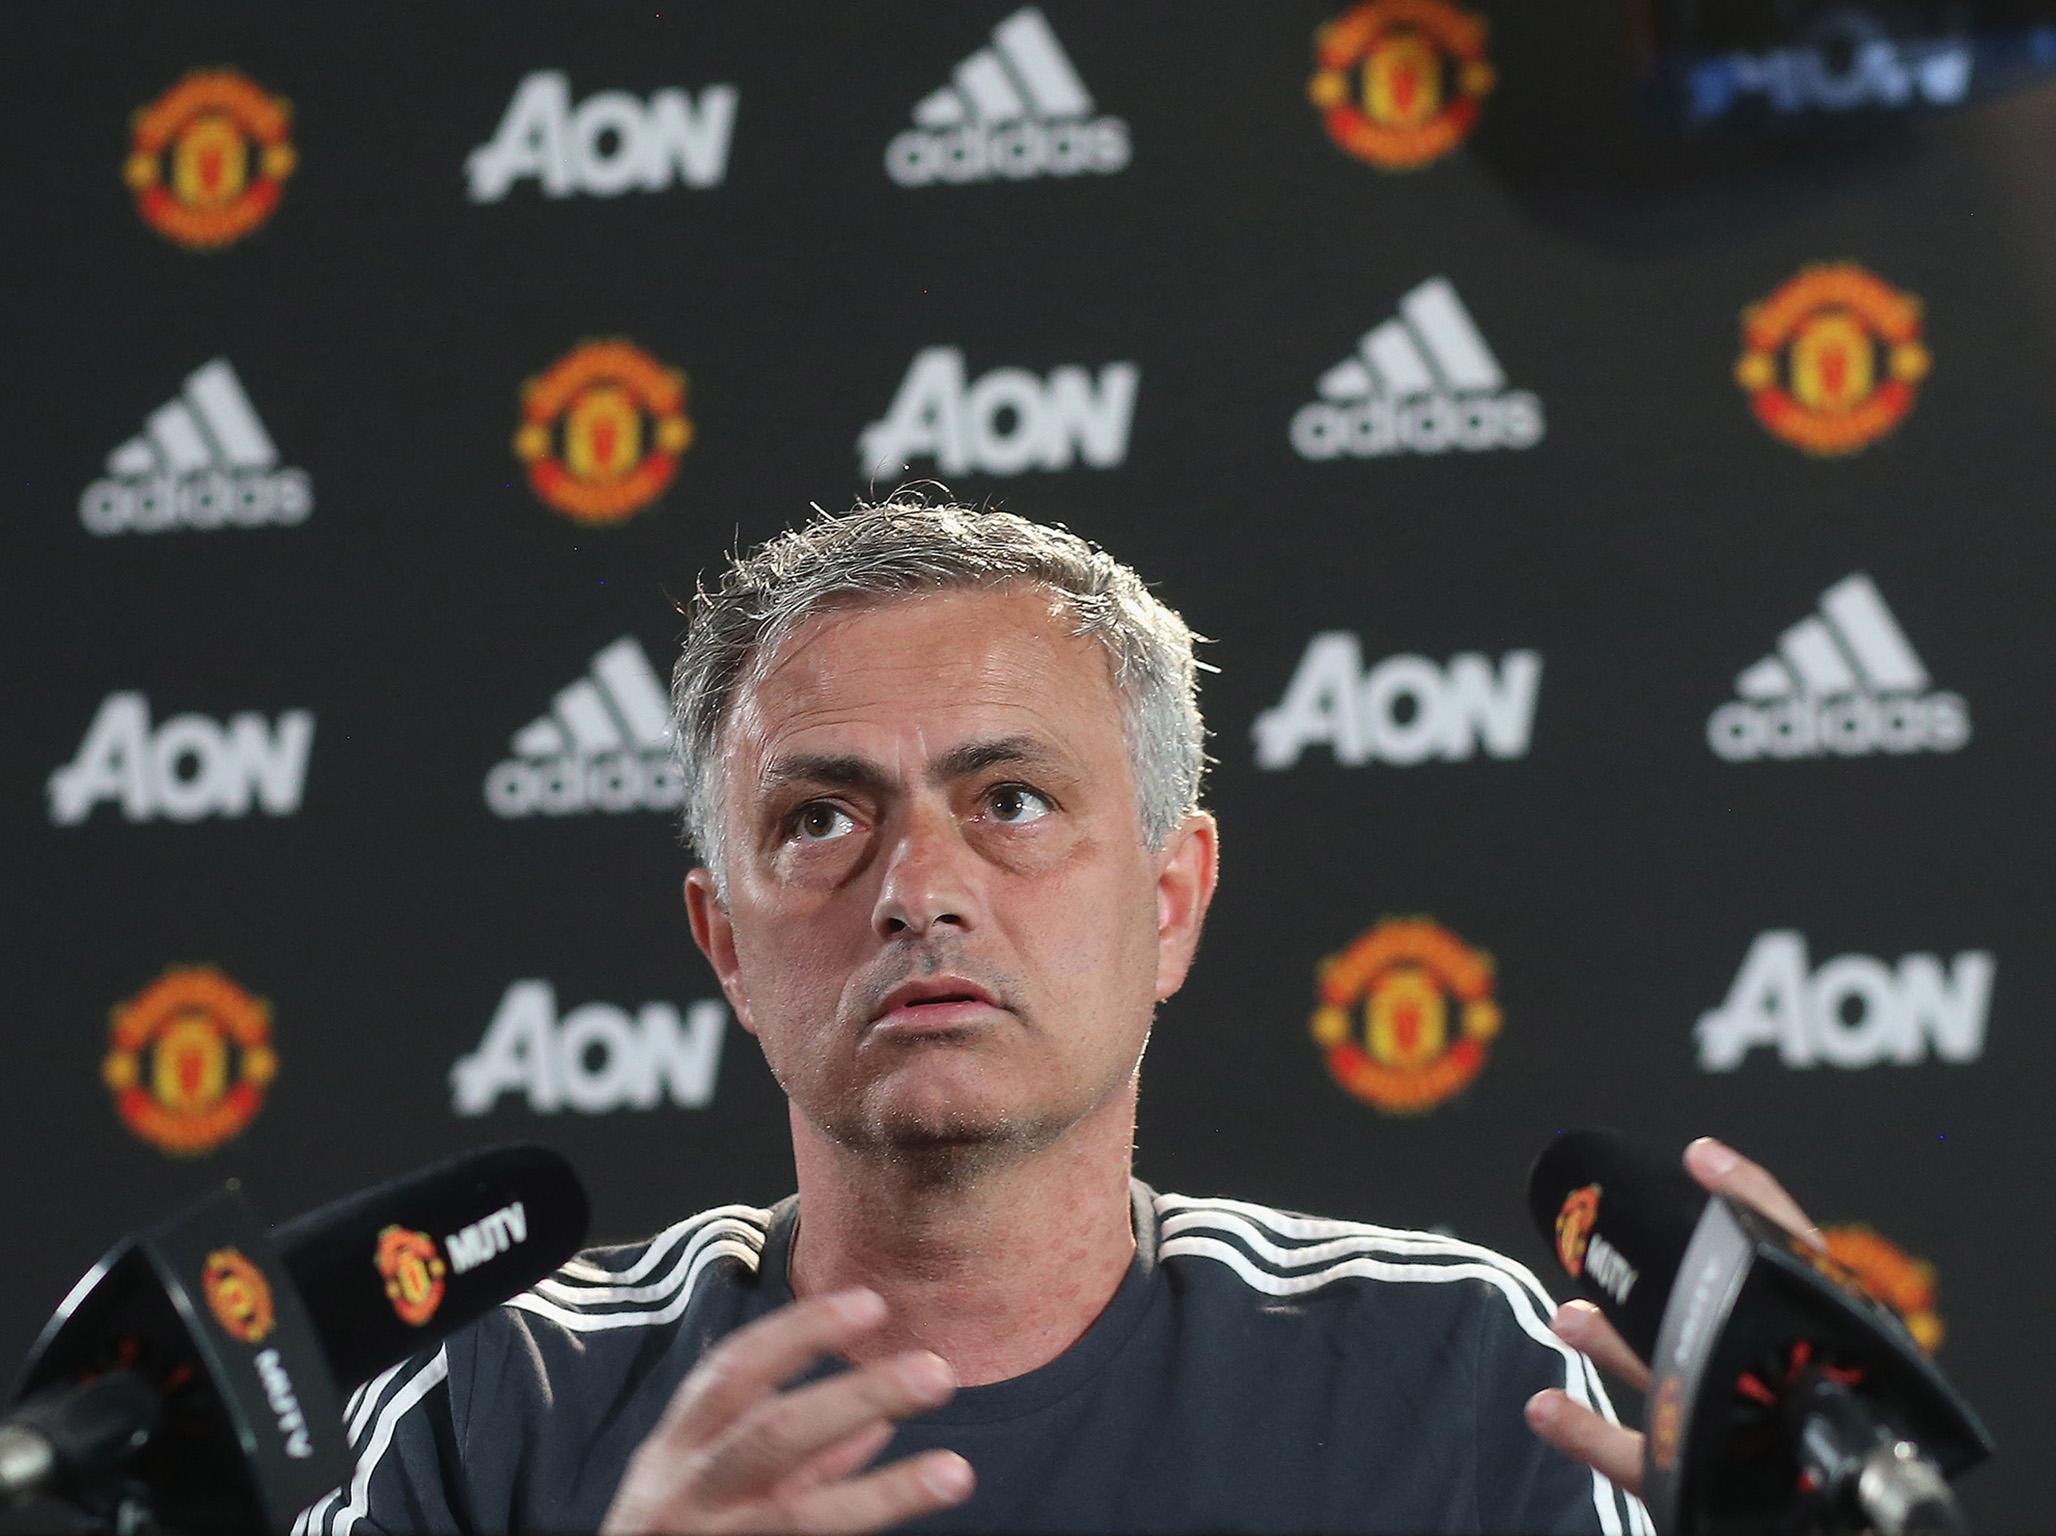 Jose Mourinho was speaking before United’s meeting with West Ham